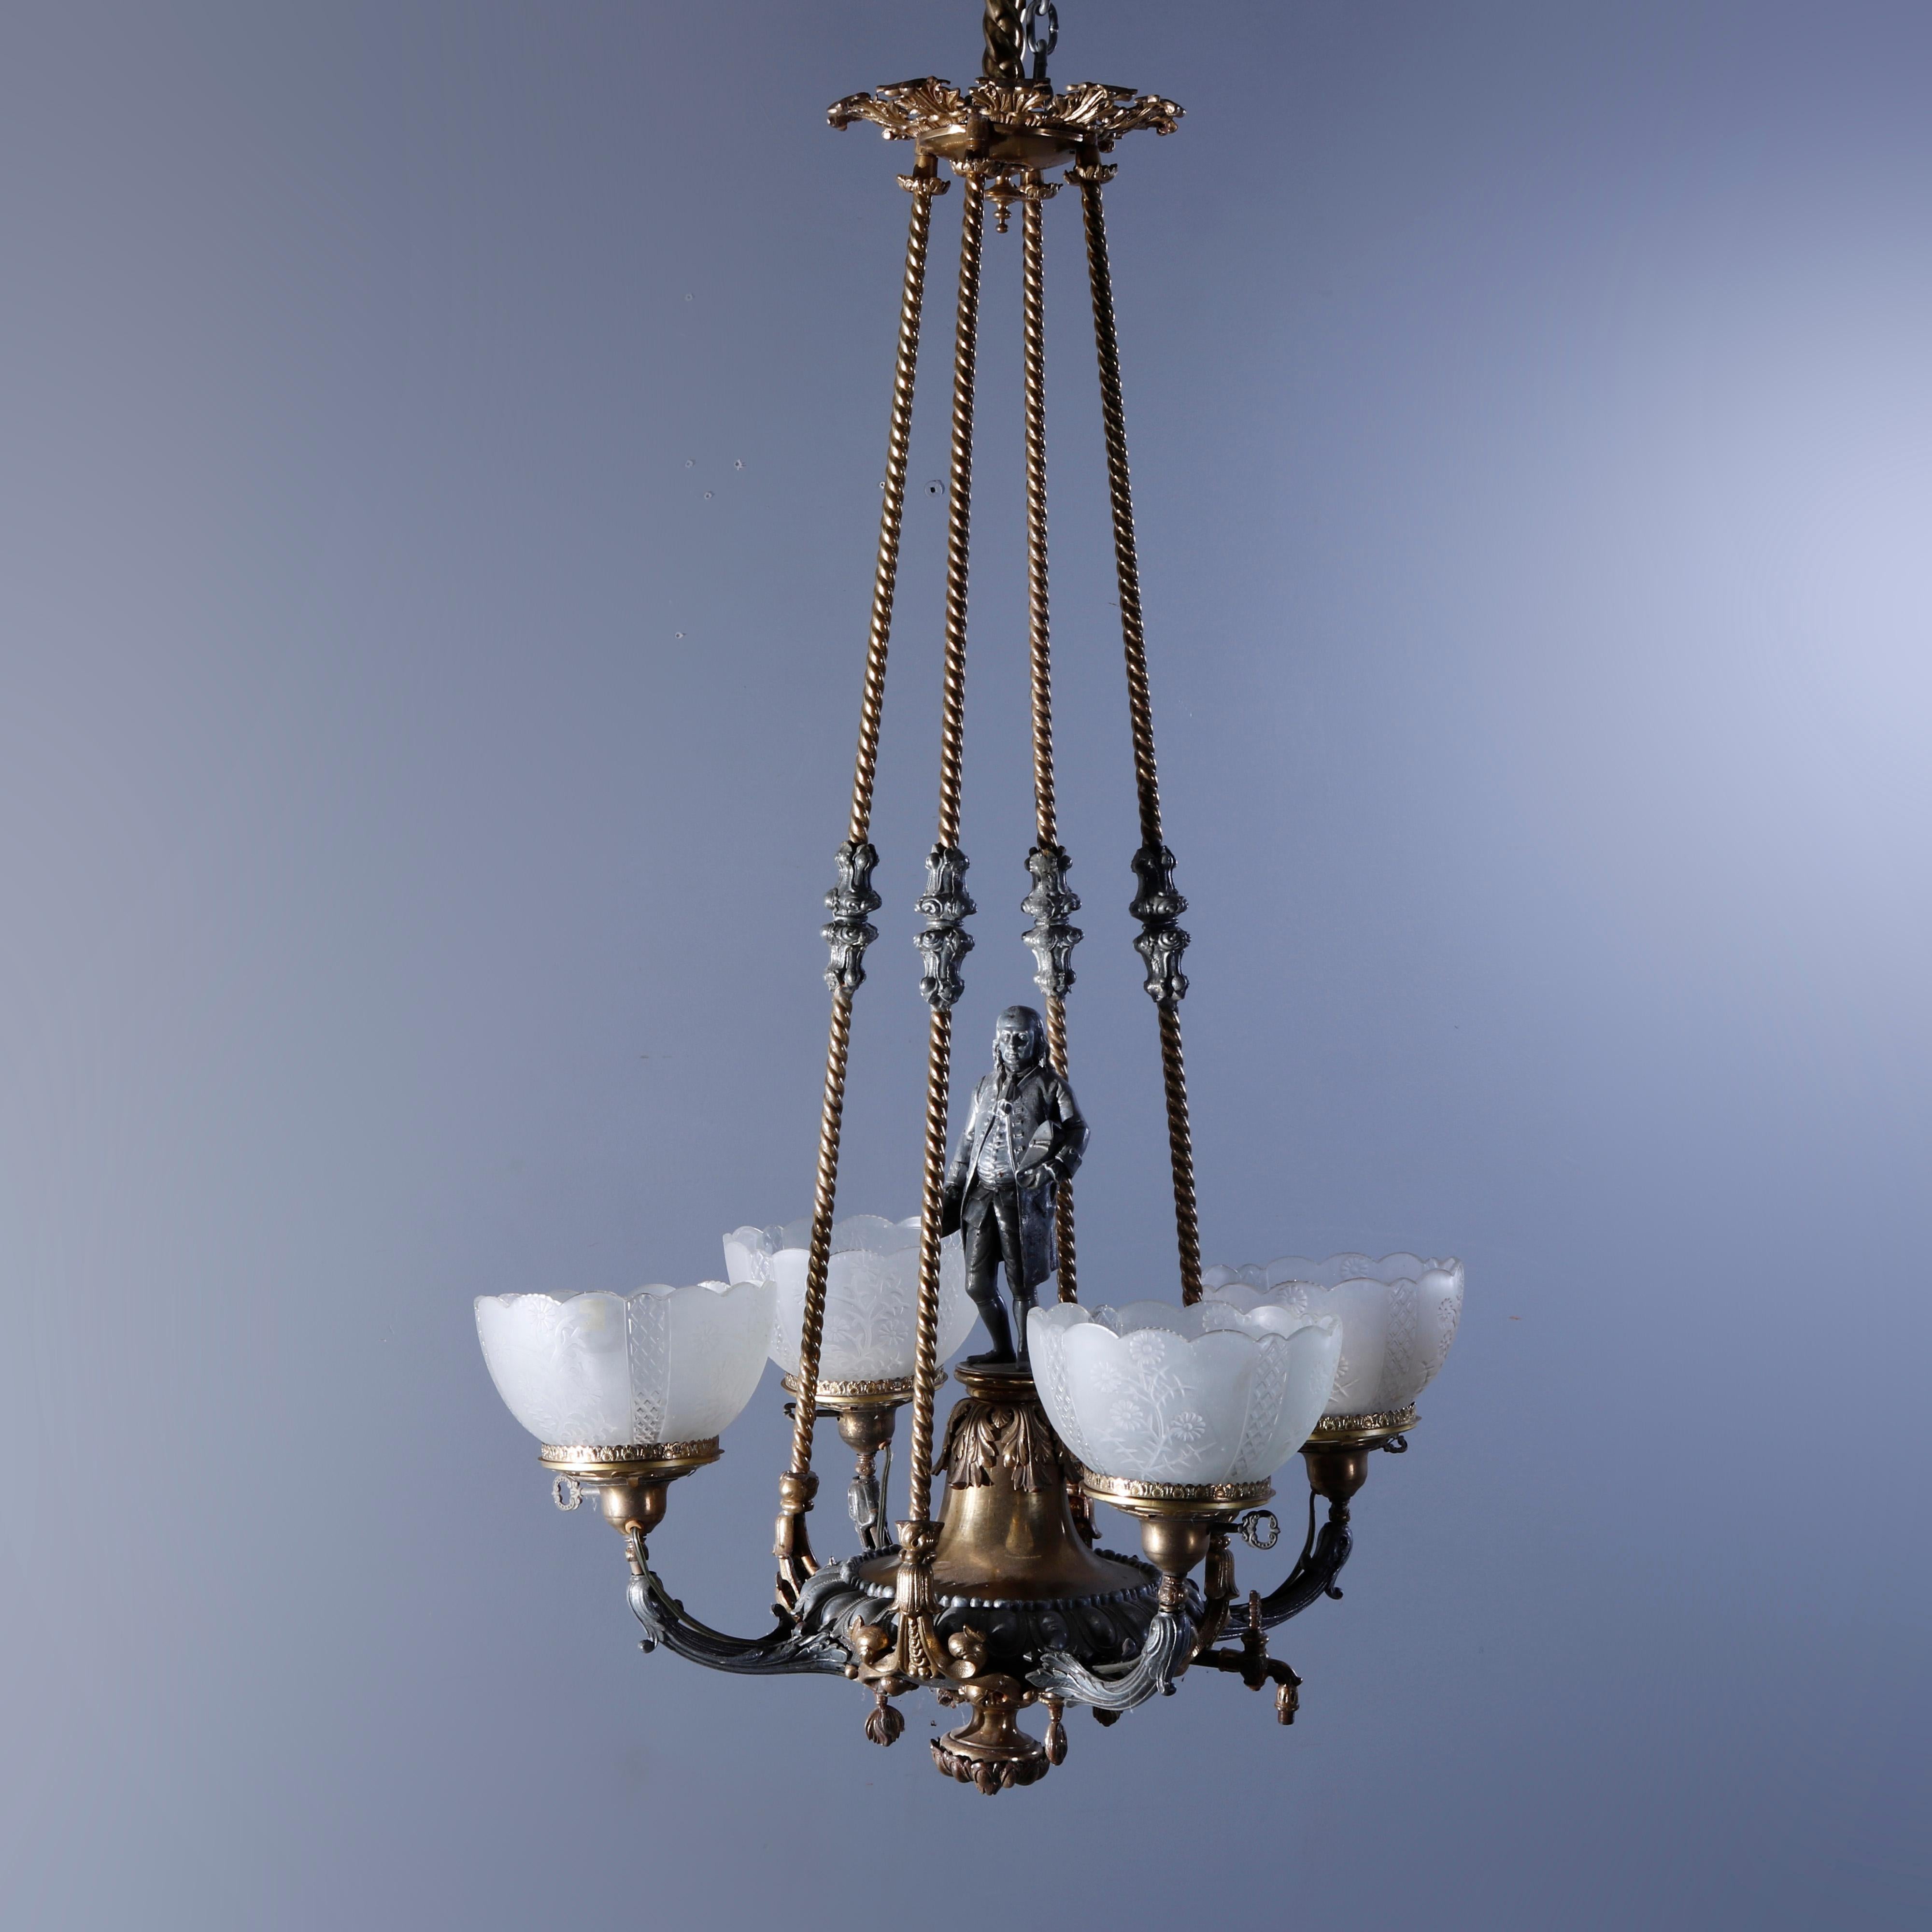 An antique figural gas chandelier attributed to Cornelius & Co. offers brass and white metal construction with central sculpture of Ben Franklin on font with acanthus foliate elements and four scroll form arms terminating in lights with floral